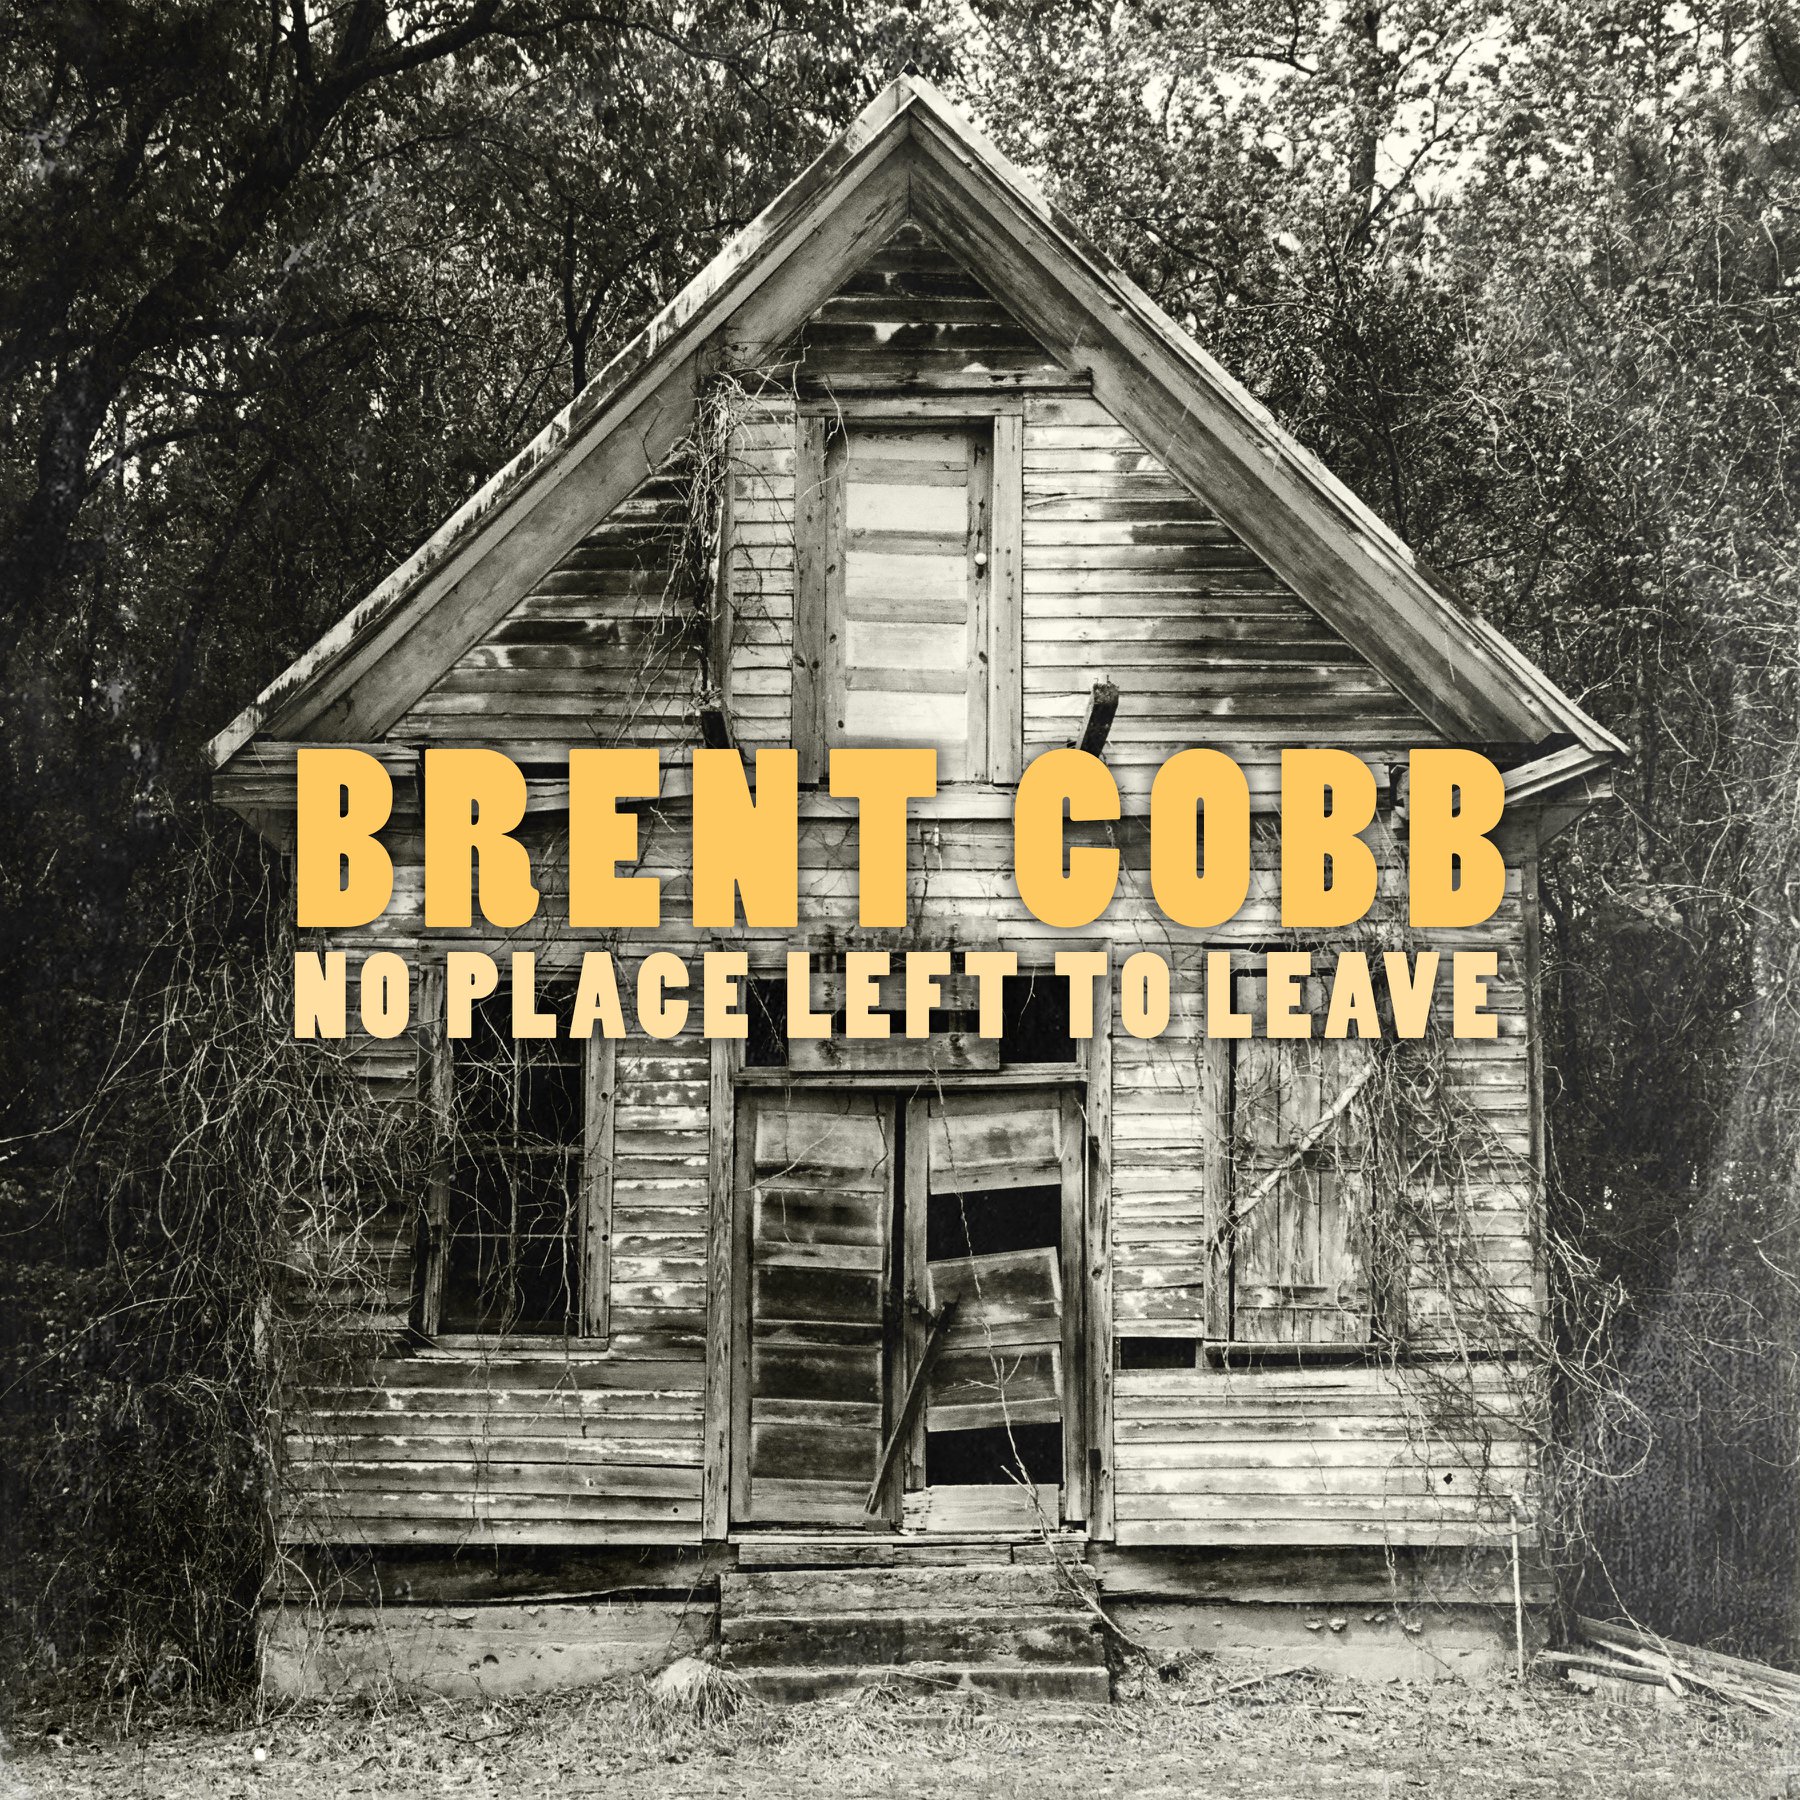 Brent Cobb No Place Left to Leave